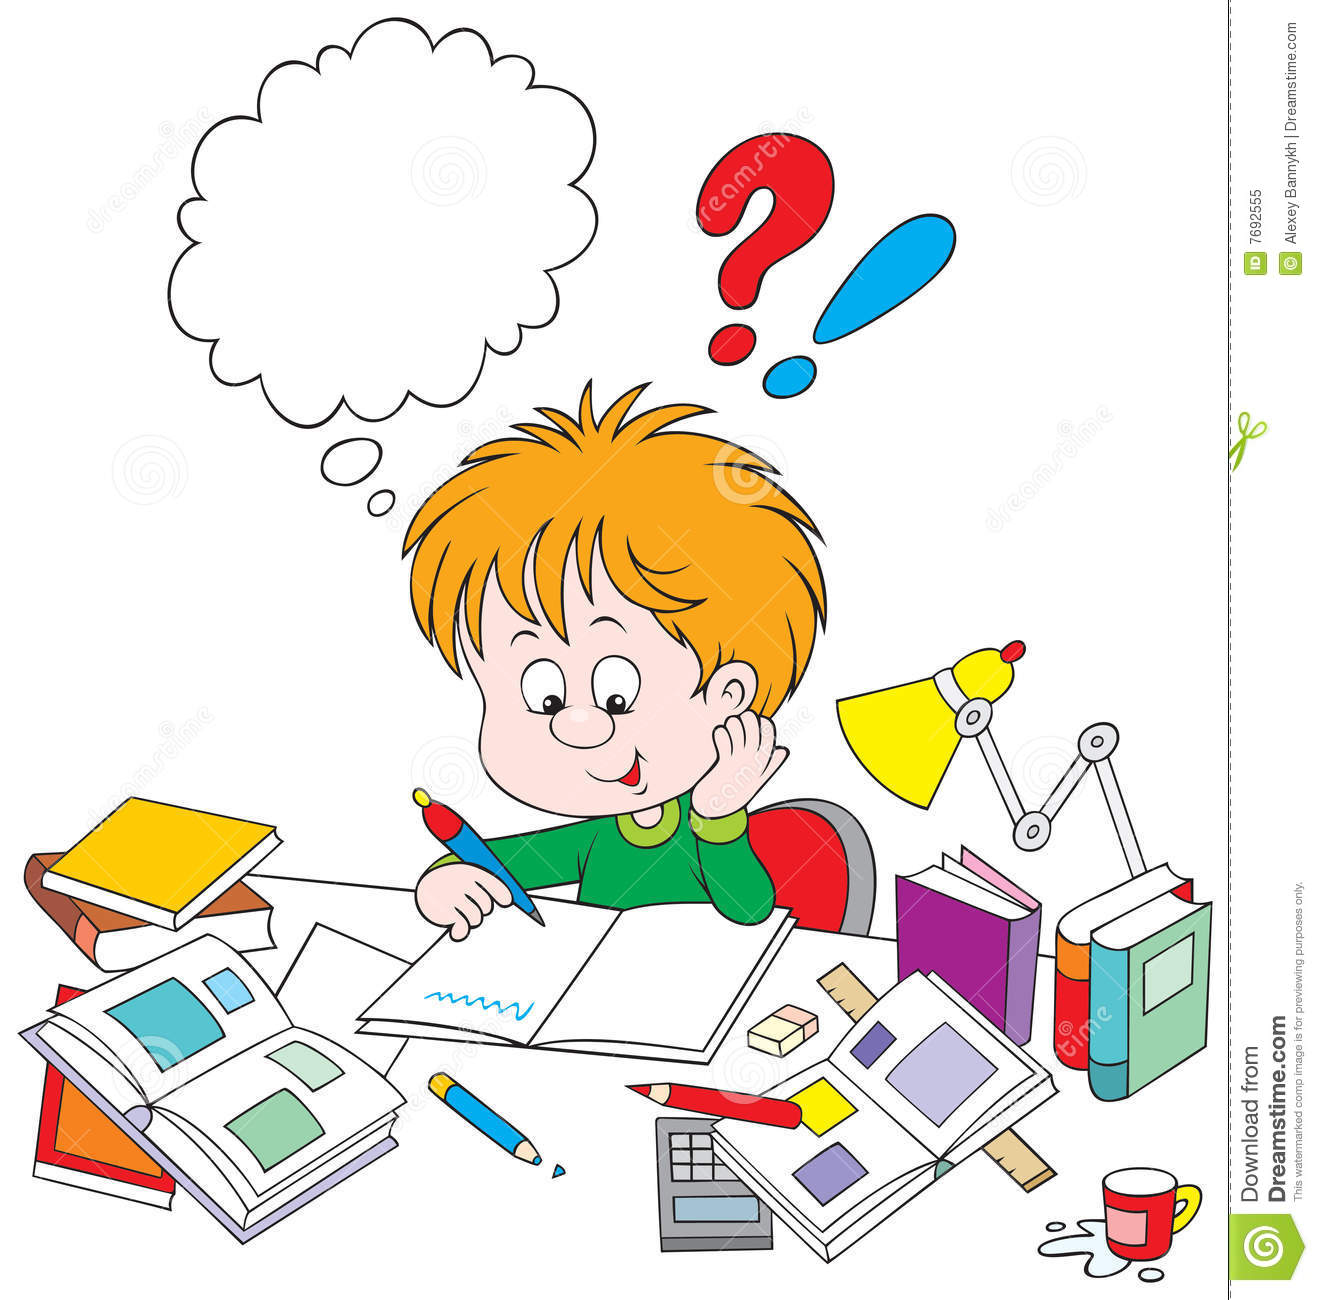 Schoolboy With Homework Royalty Free Stock Photo   Image  7692555